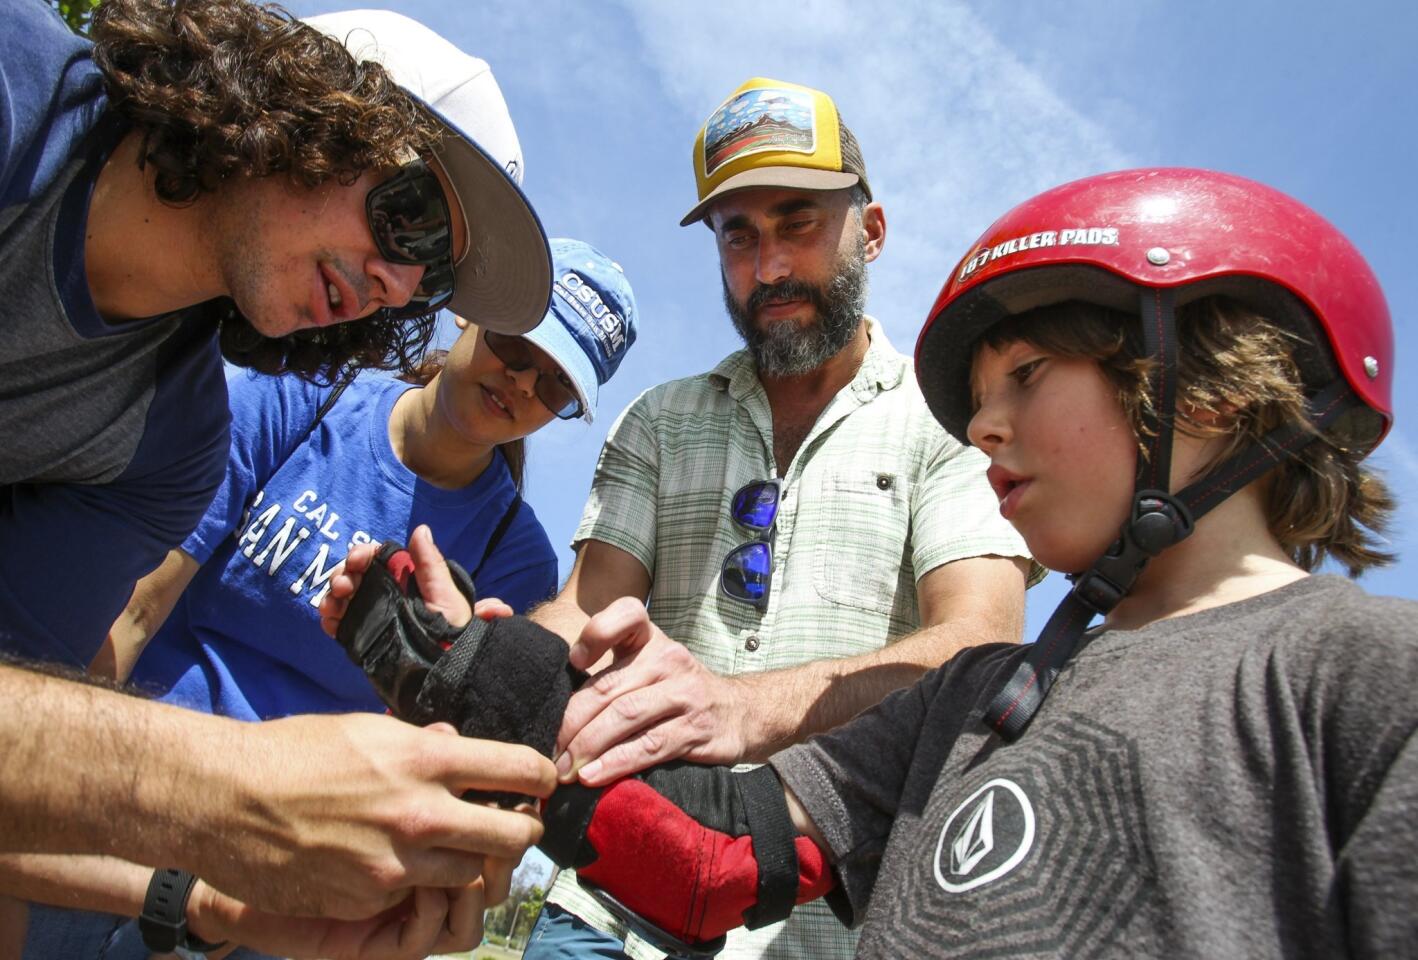 Cal State University San Marcos intern Moses Wosk, 24, left, puts a protective cover over a wrist device, that records heart rate, length of time skating and distance, on Judah Mann, 6.